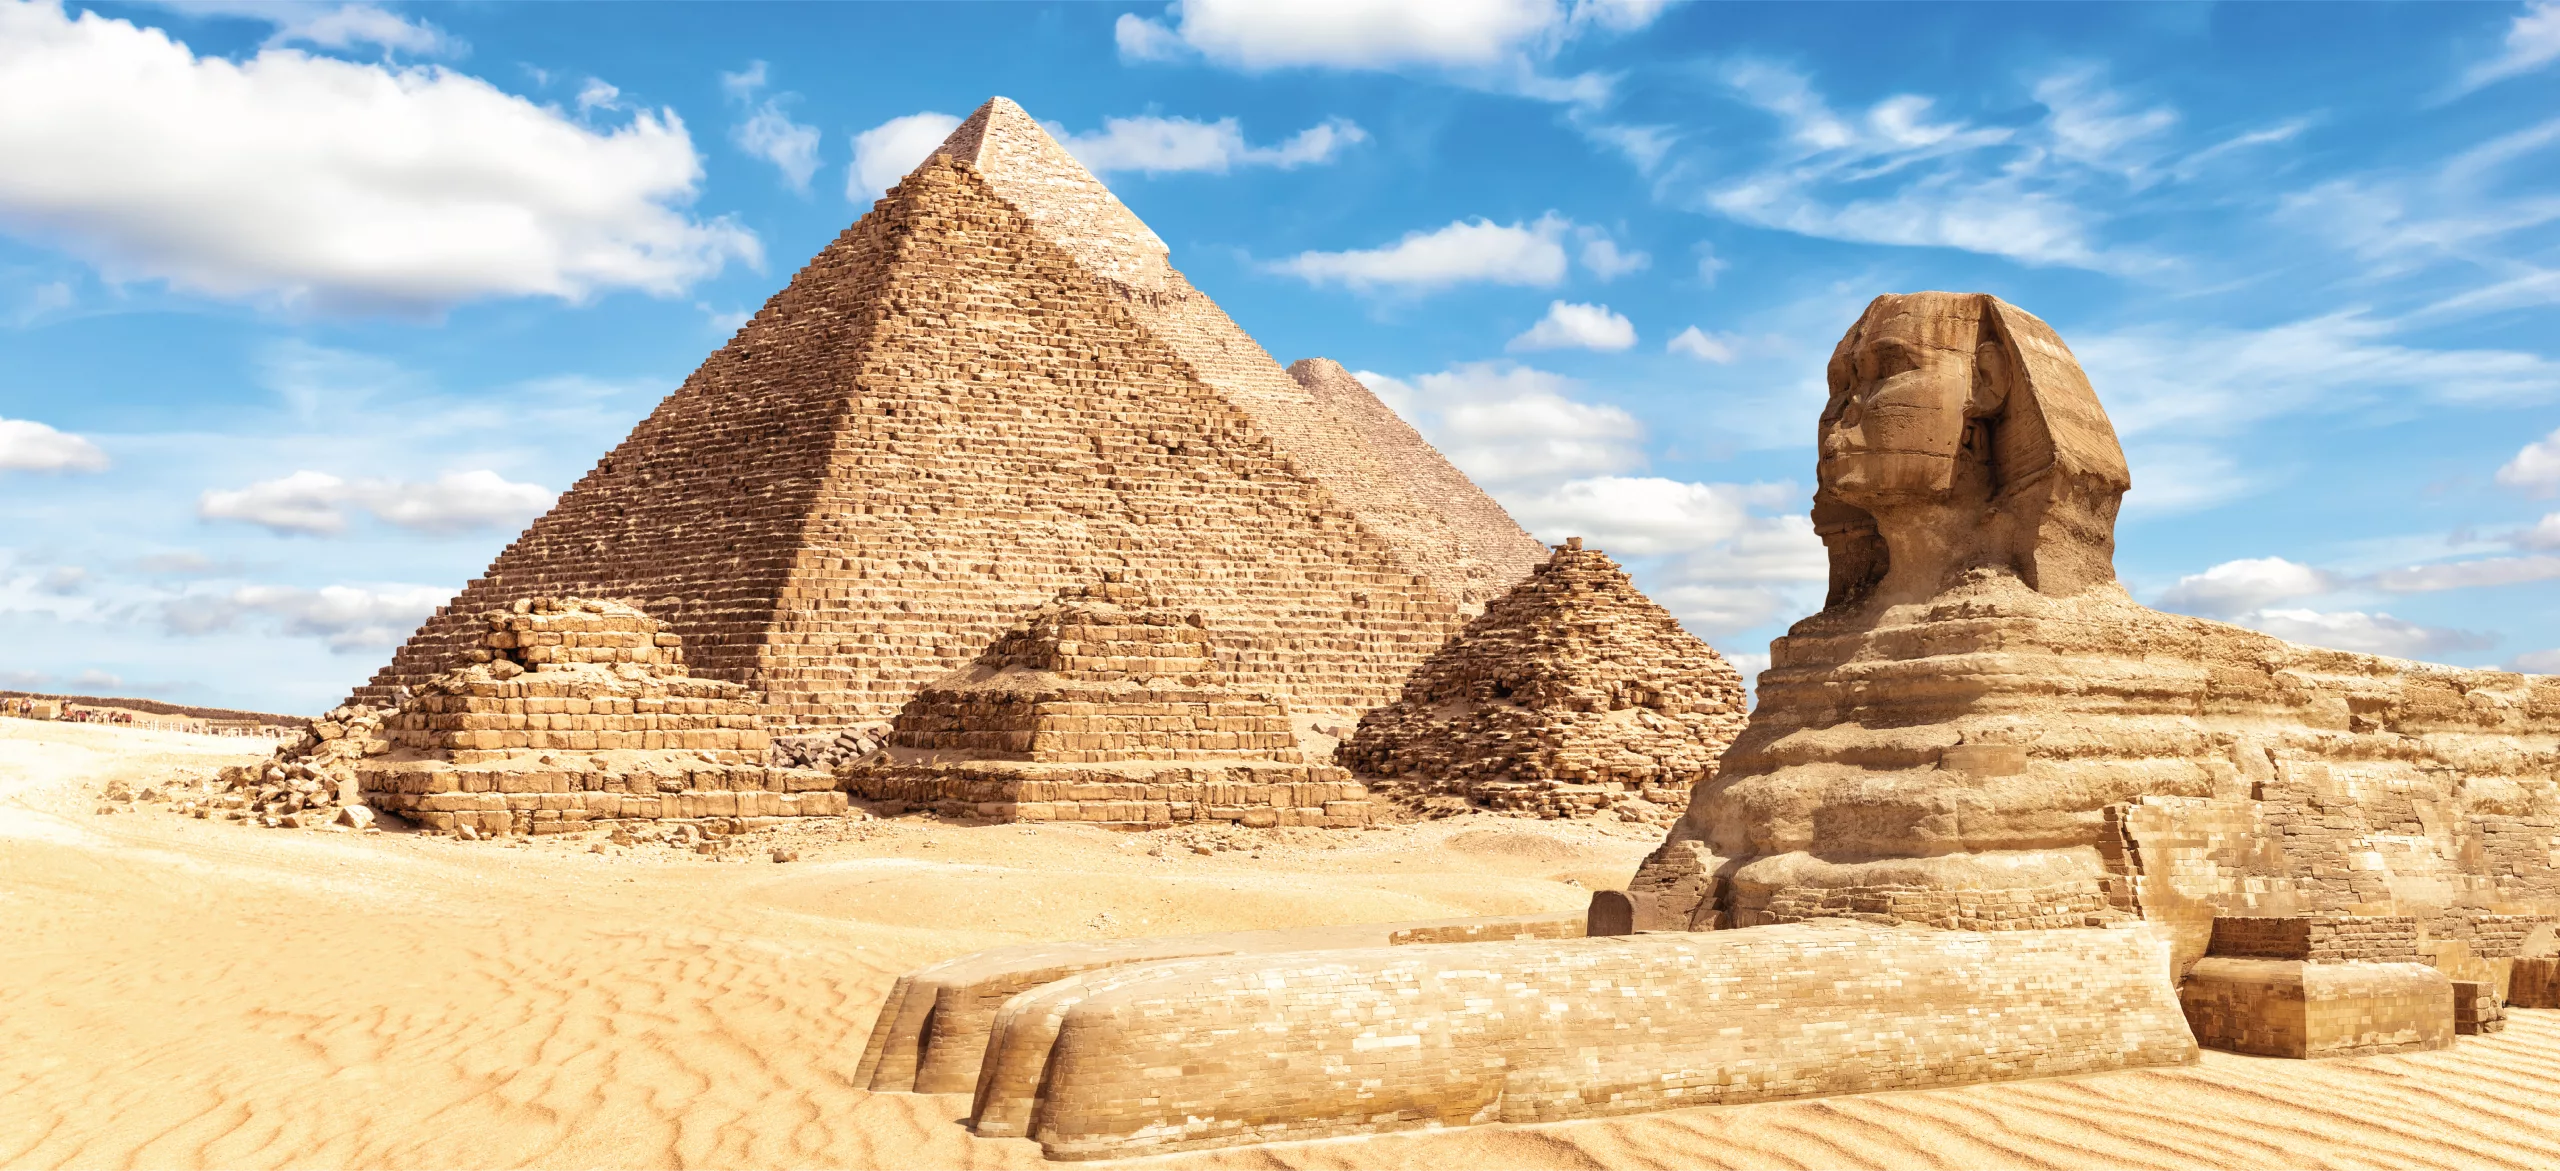 The Great Pyramid of Giza, Egypt – Oldest Among the 7 Wonders of the World